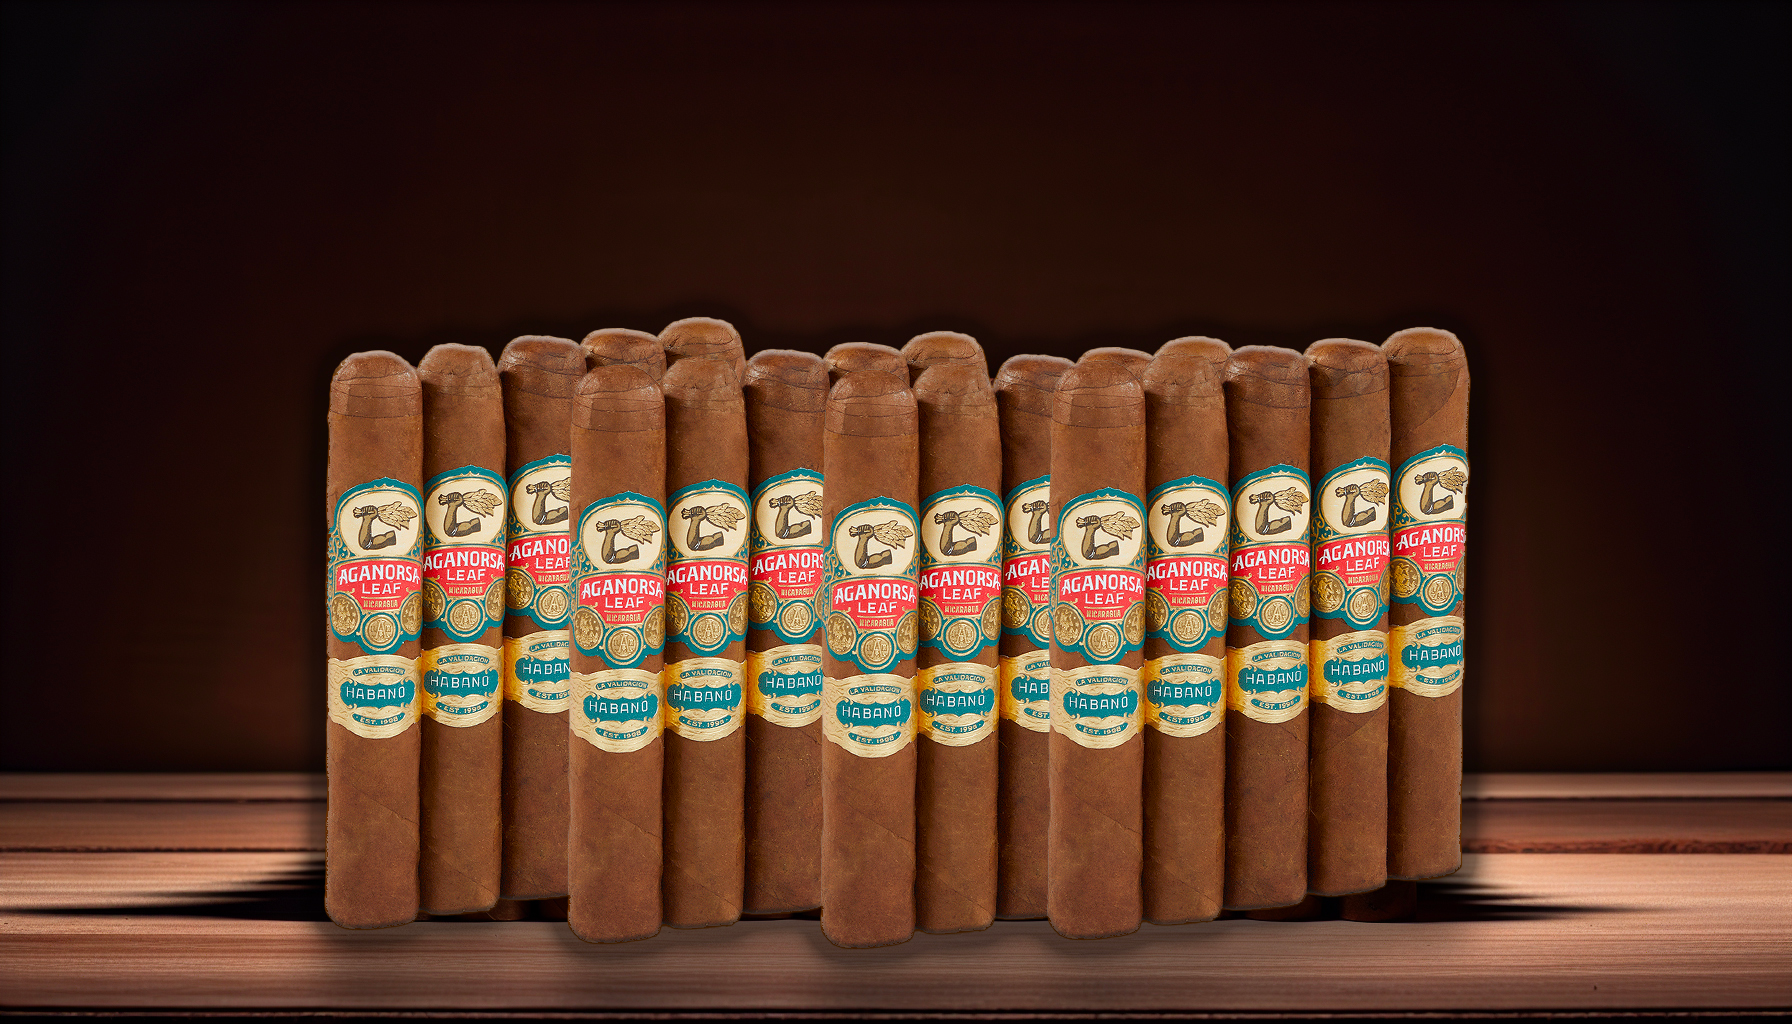 A selection of Aganorsa Leaf La Validación Habano cigars in various sizes and flavors